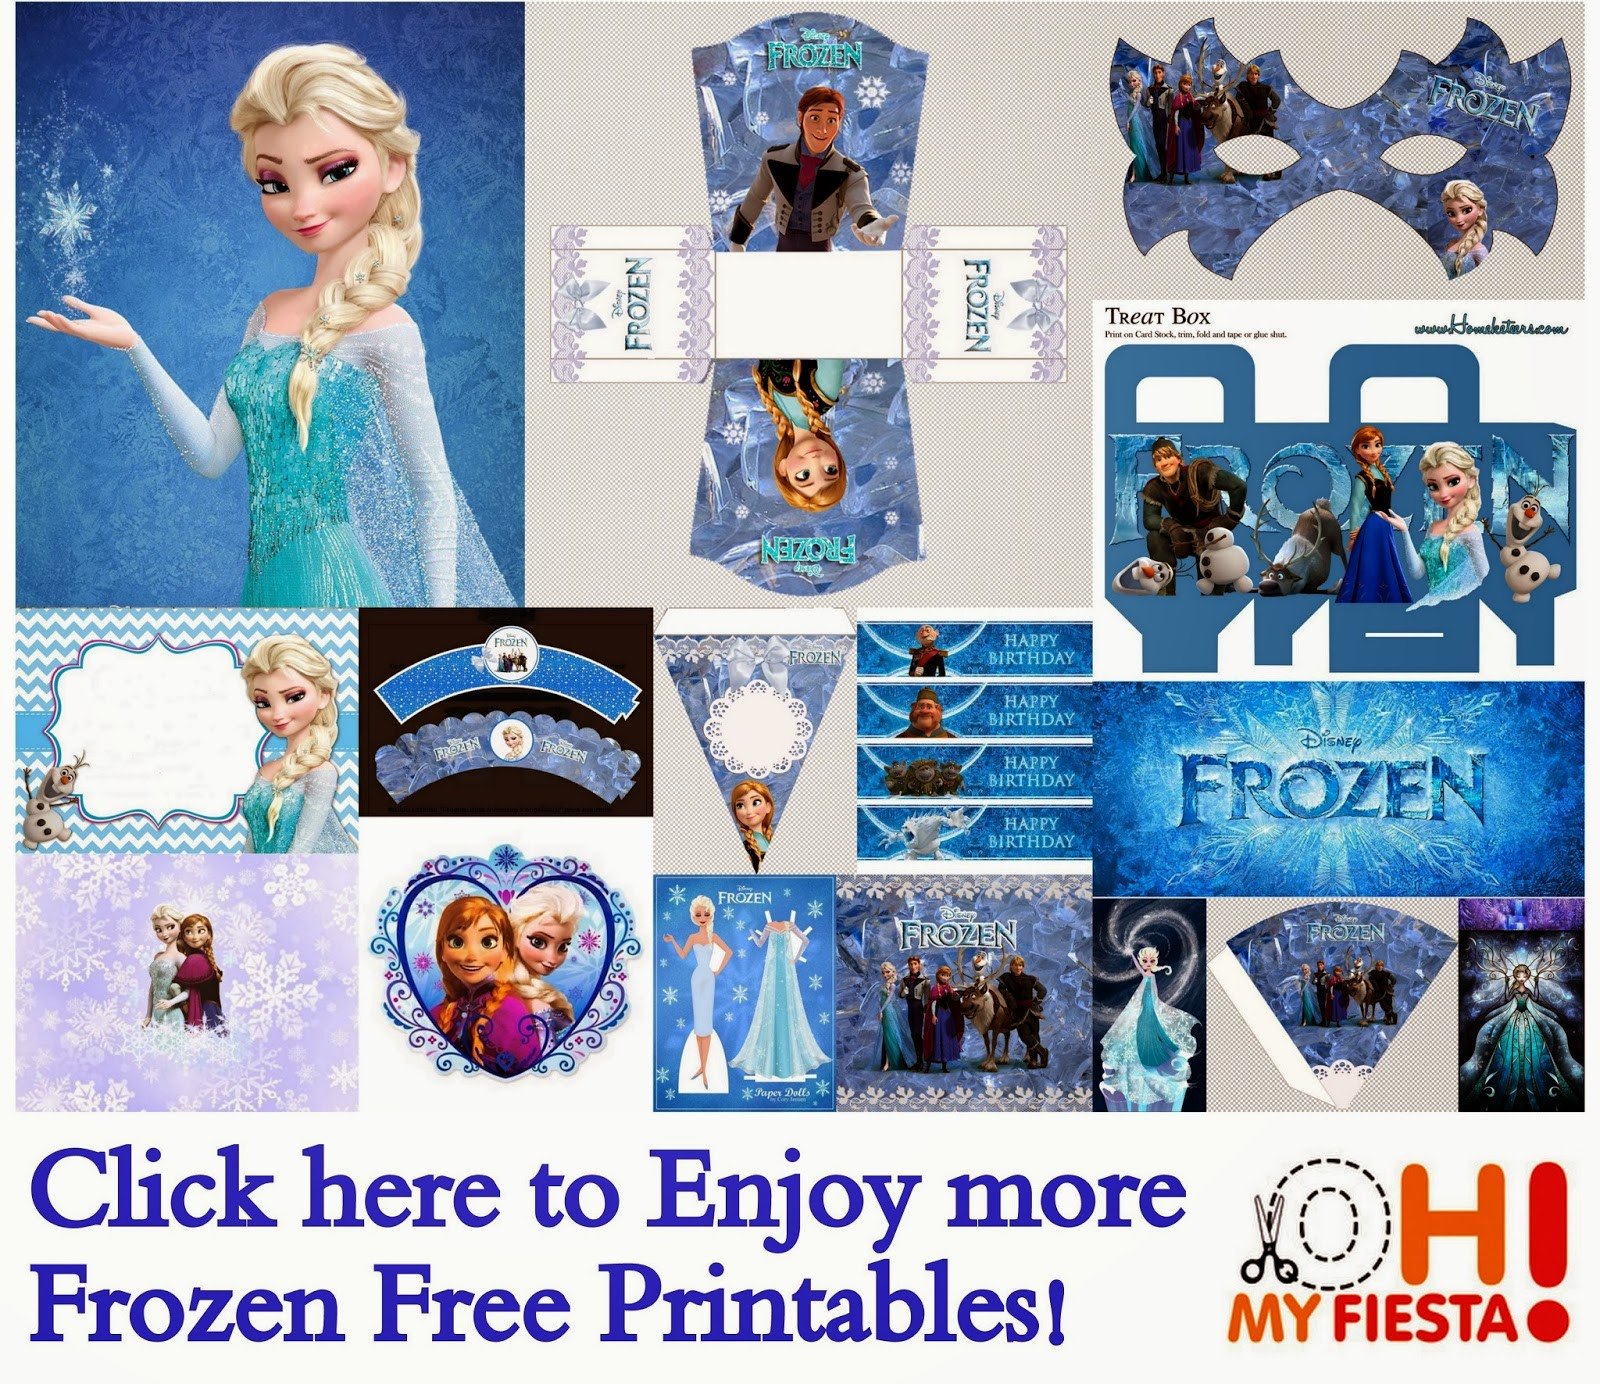 Free Printable Frozen Invites Frozen Free Printable Cards or Party Invitations